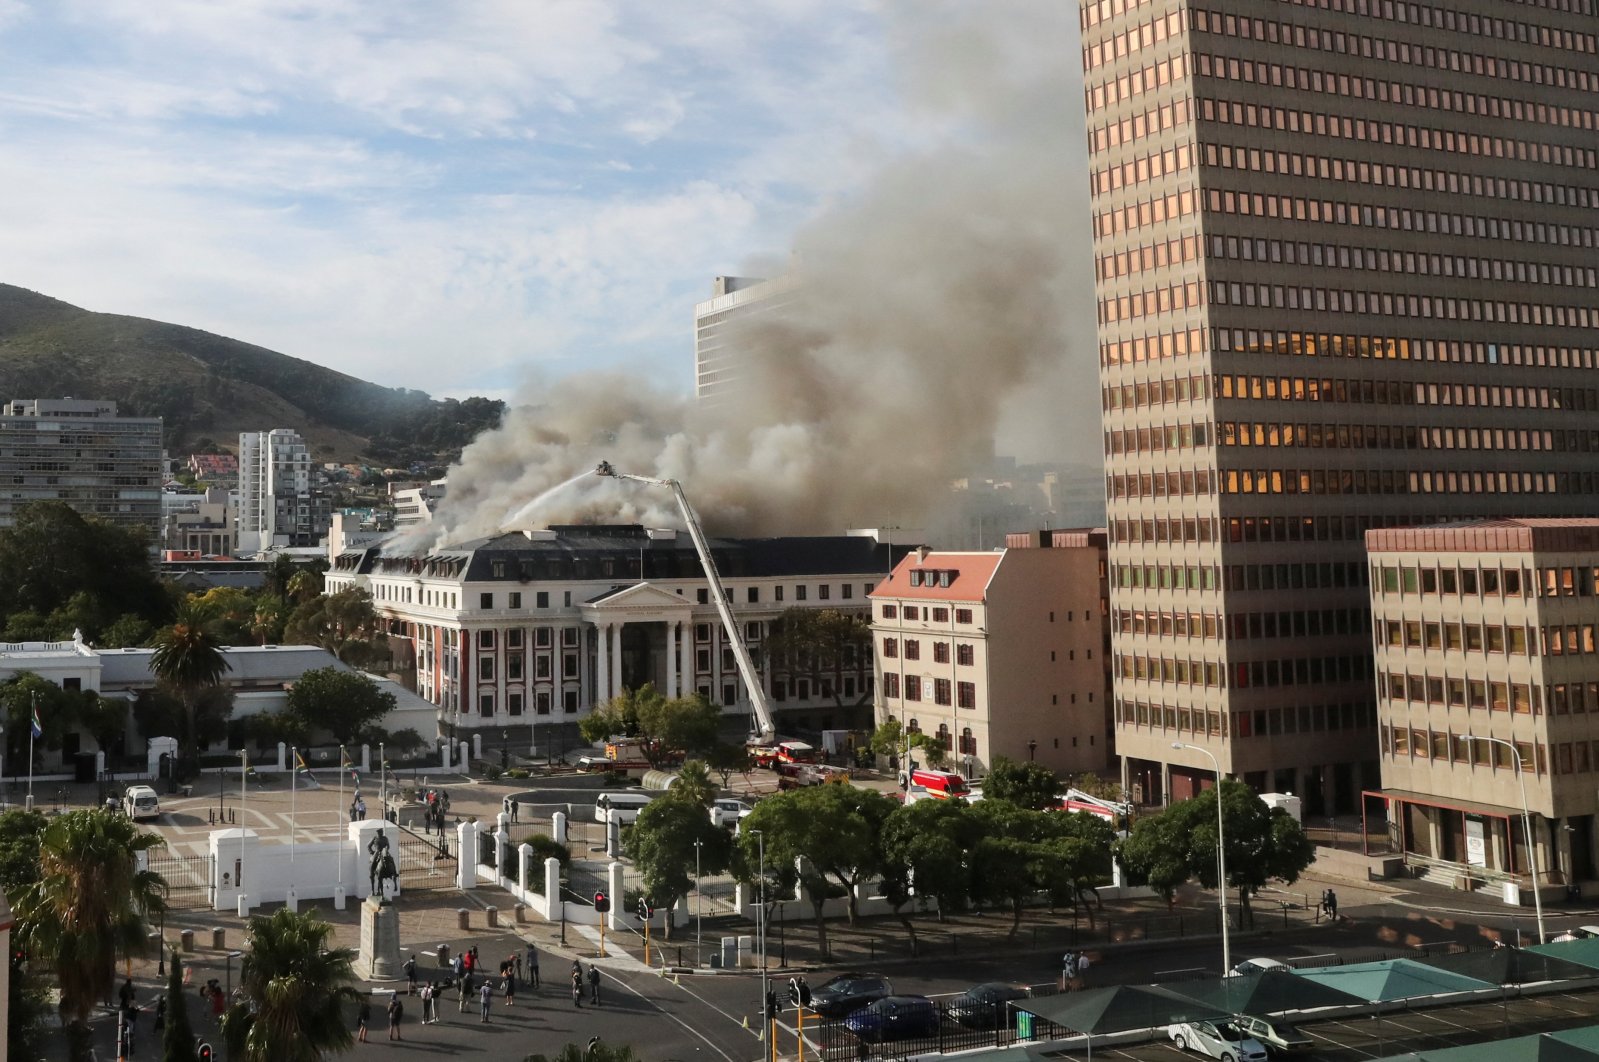 Firefighters work at the parliament as the fire flared up again, in Cape Town, South Africa, Jan. 3, 2022. (REUTERS/Sumaya Hisham)